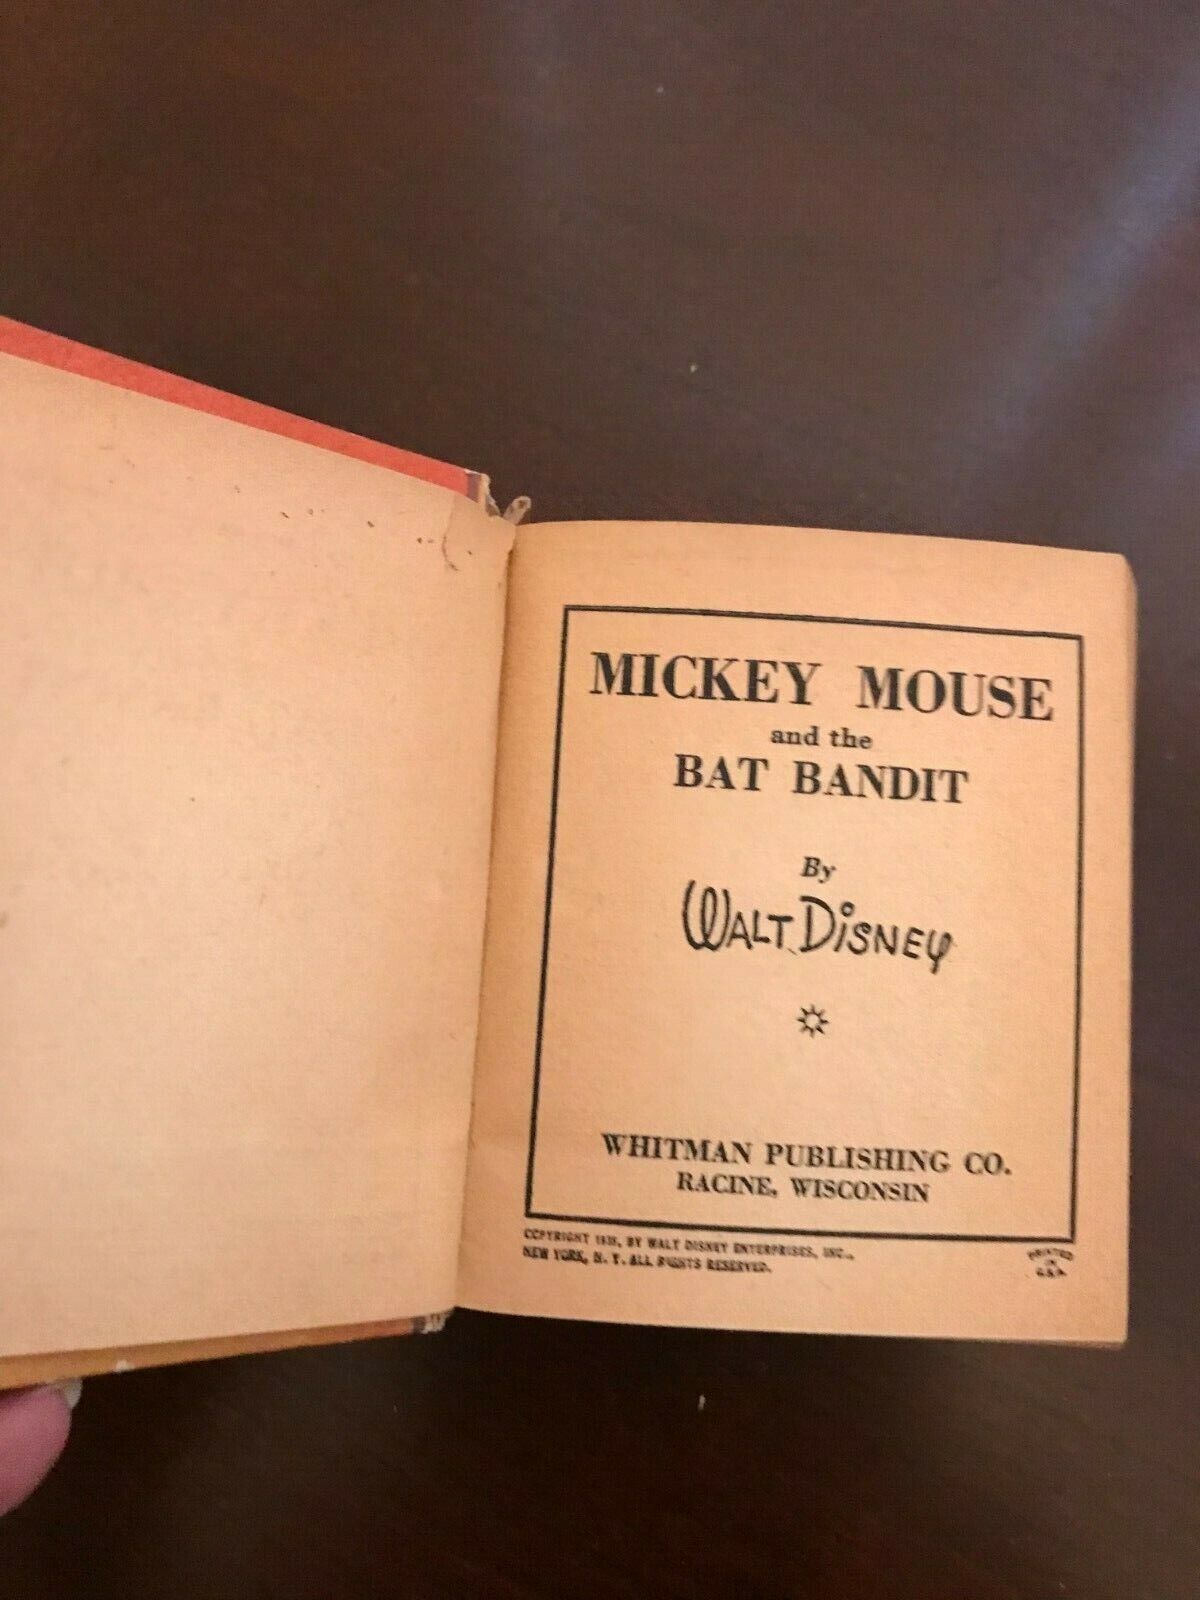 Disney vintage books - The Big Little Book featuring Mickey Mouse Без бренда - фотография #10